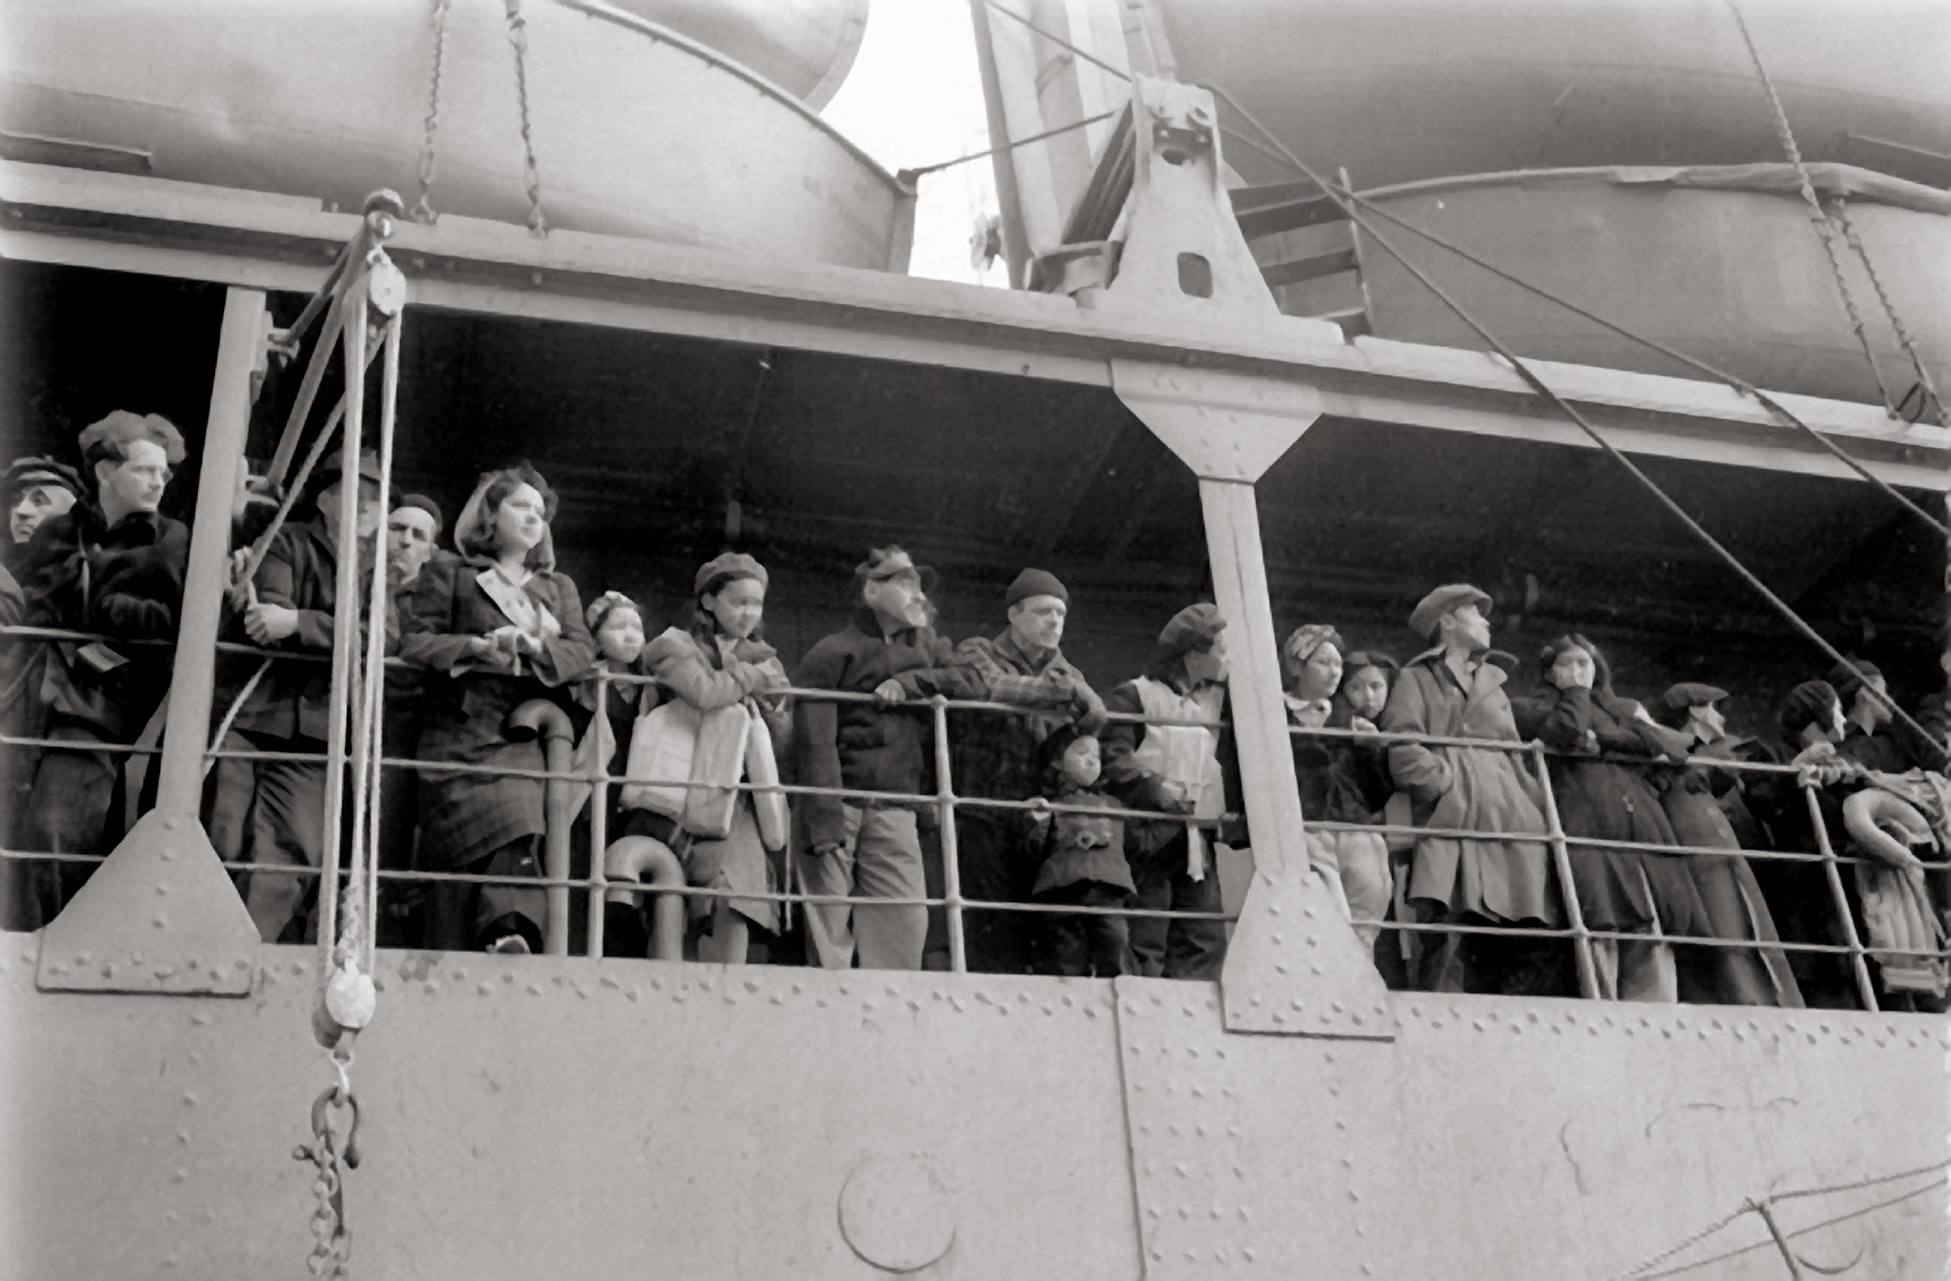 People crowd at the railing of a ship